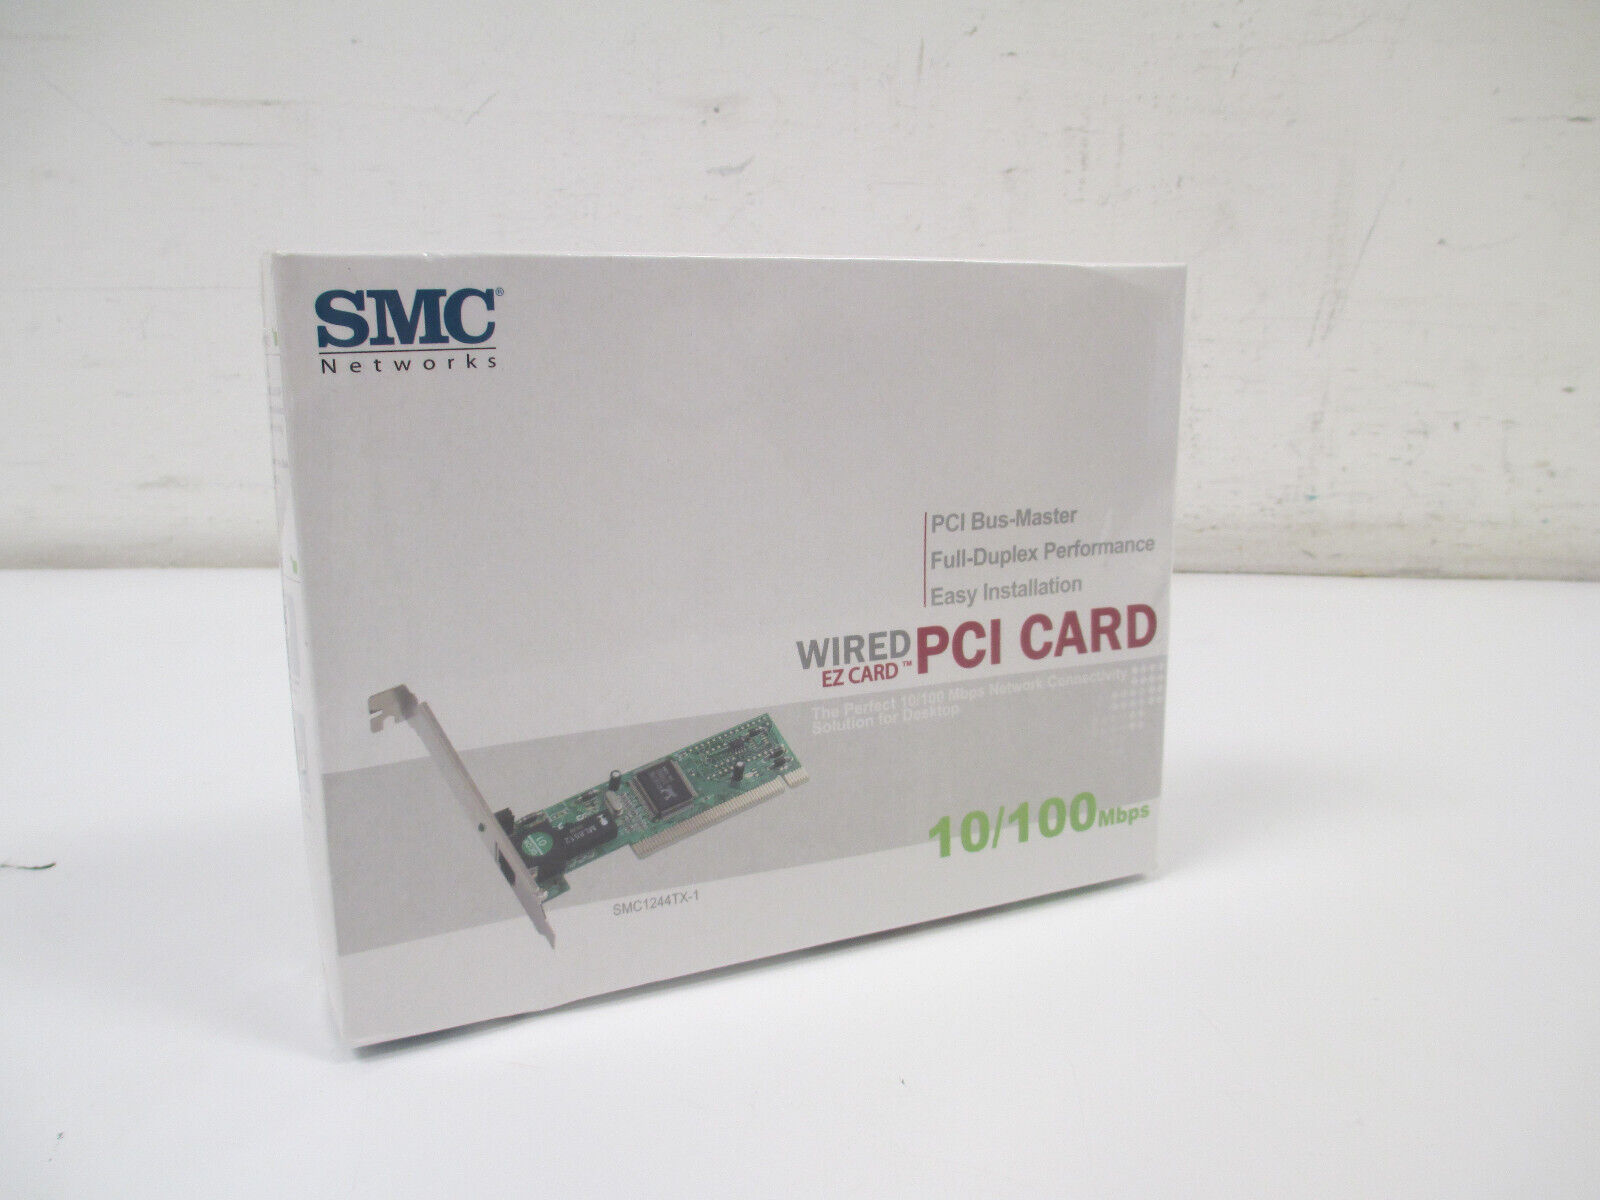 New SMC Networks SMC1244TX-1 Wired EZ PCI Card 10/100 Mbps